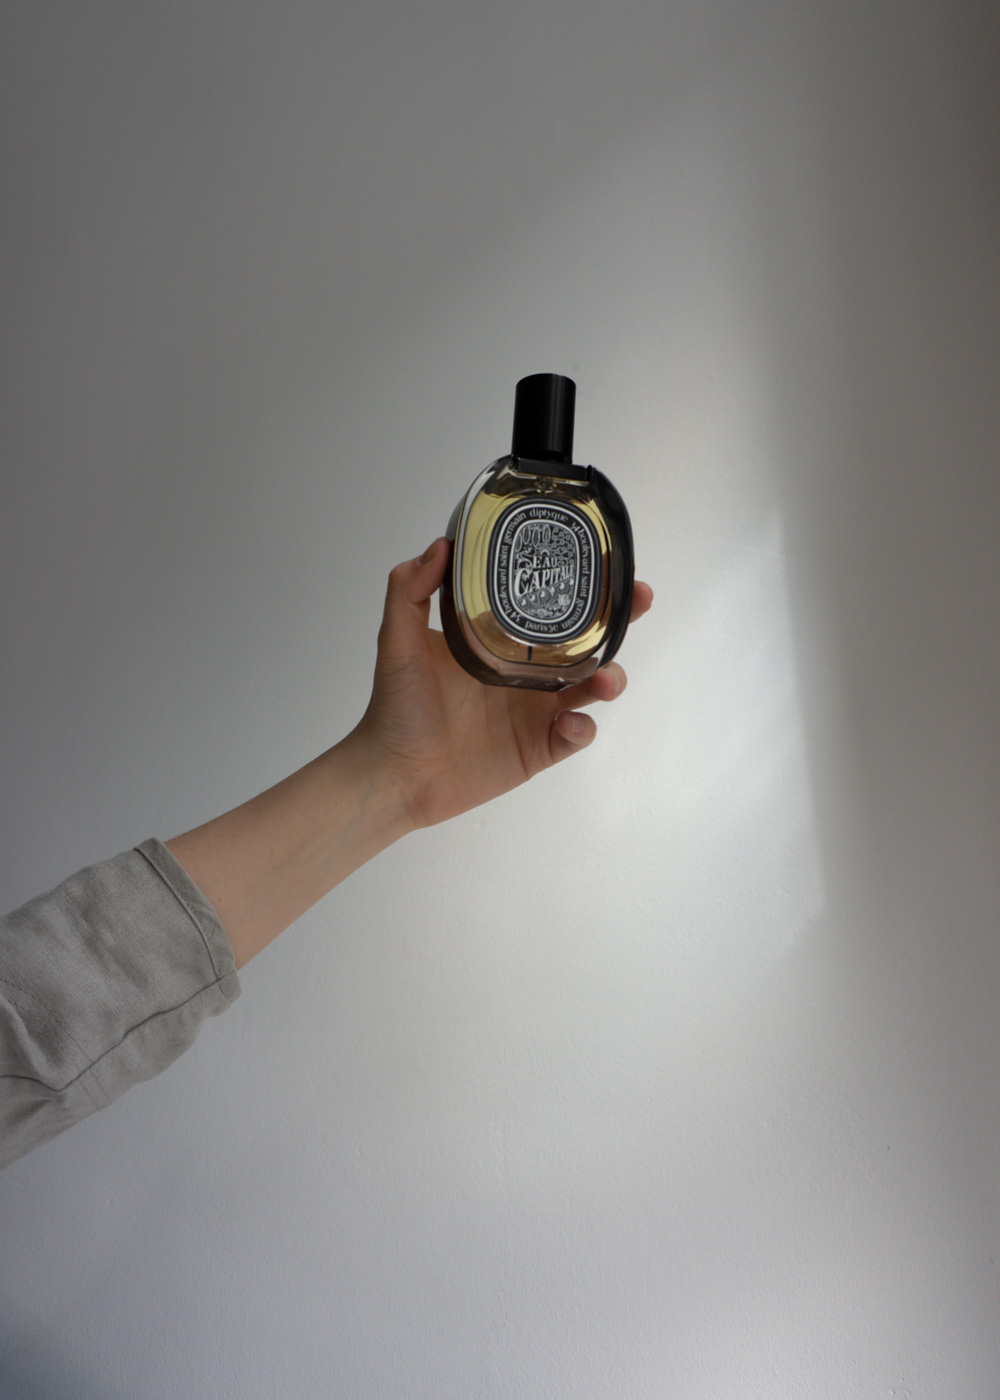 Diptyque Paris Perfume ~ Parfum Beauty Fragrance, French Aesthetic, Product Photography, Light Shadows, Shadow Play, Minimalist Style, Fashion - RG Daily Blog